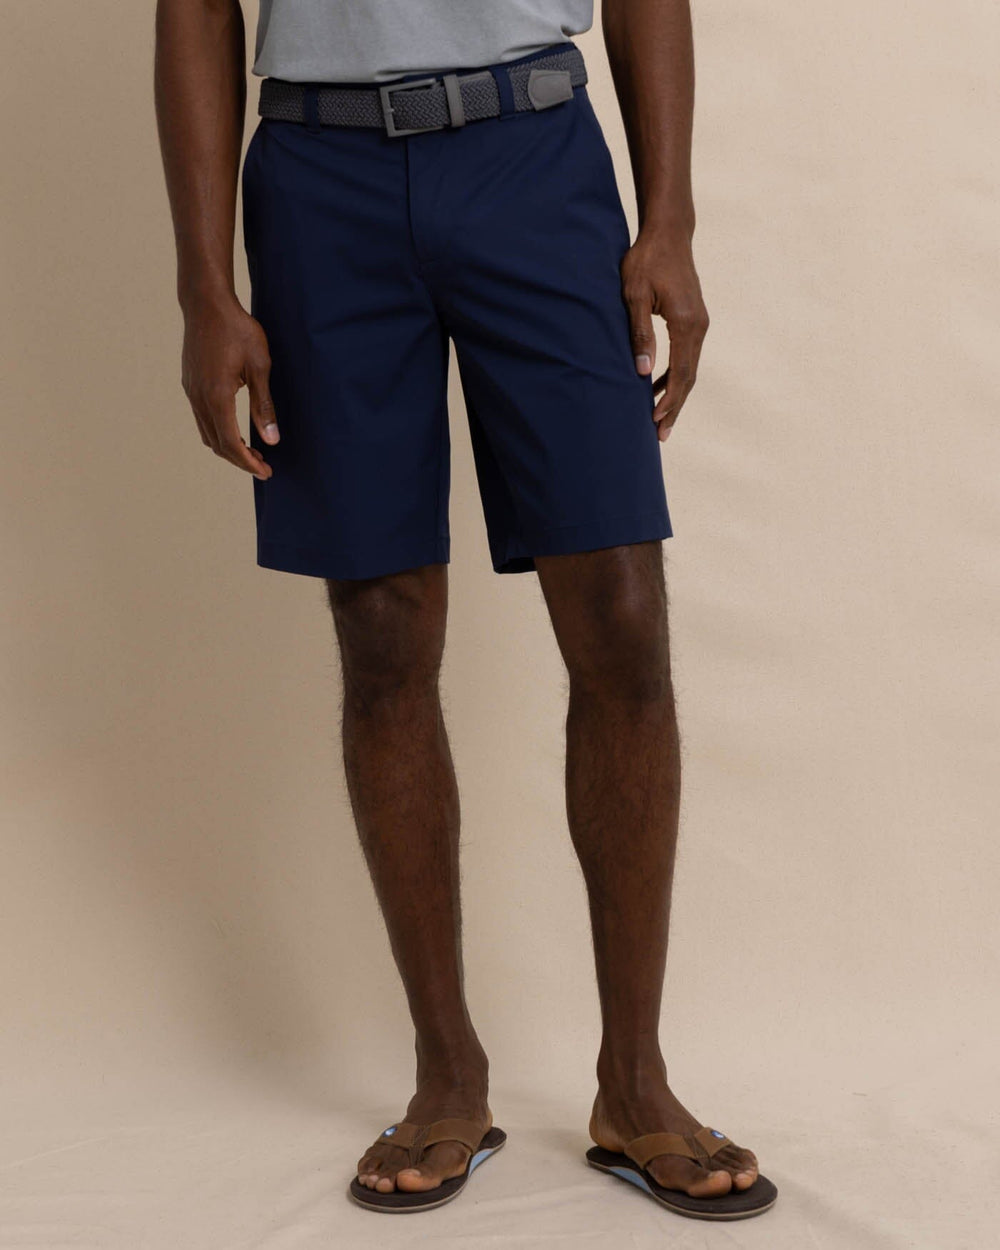 The front view of the Southern Tide brrr die 10 Short by Southern Tide - True Navy